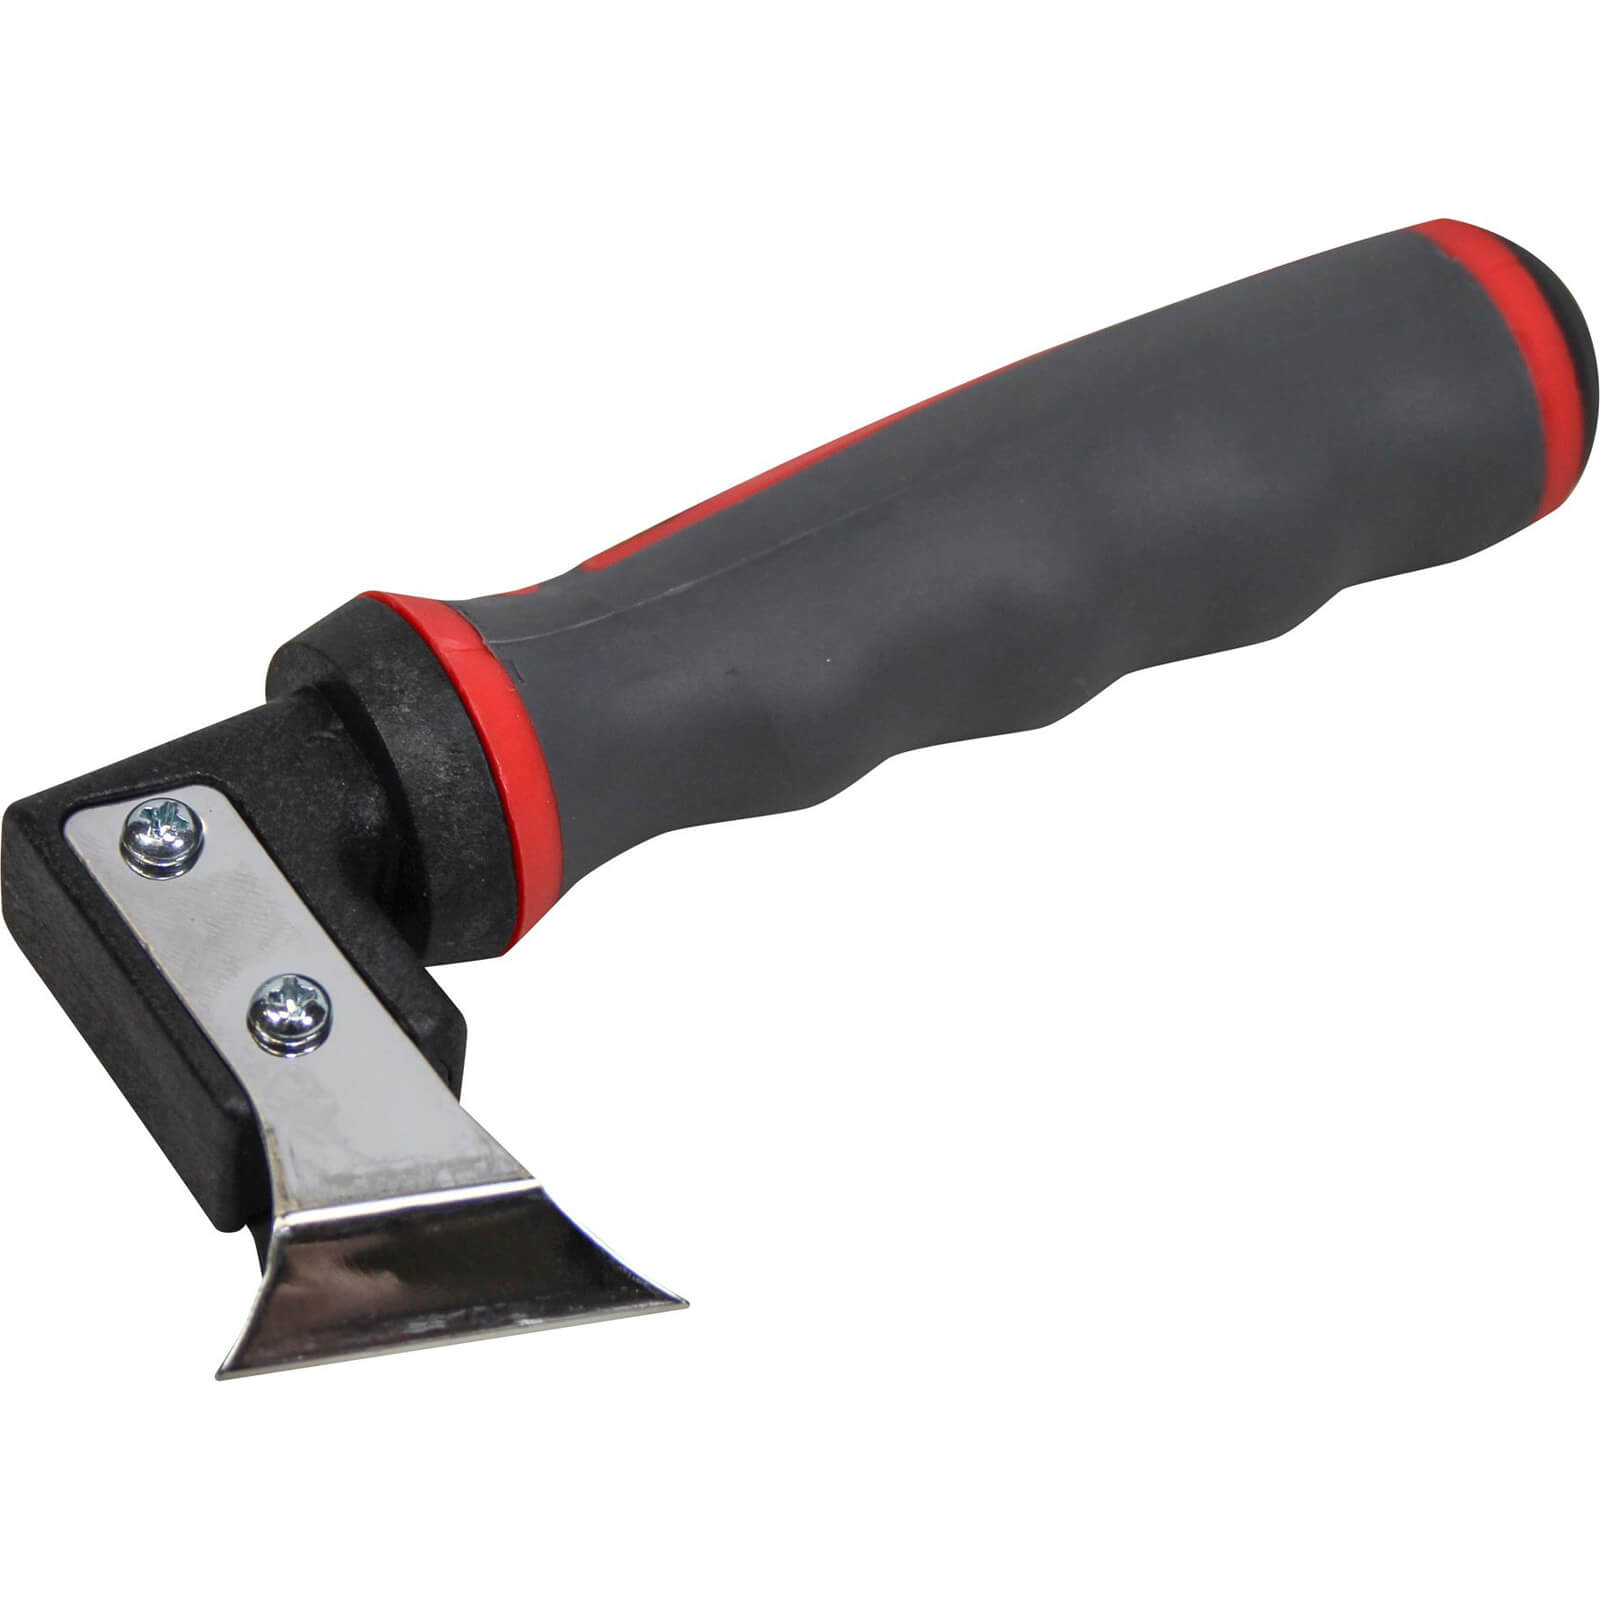 Image of Faithfull Silicone Removal Knife Stainless Steel Blade Soft-Grip